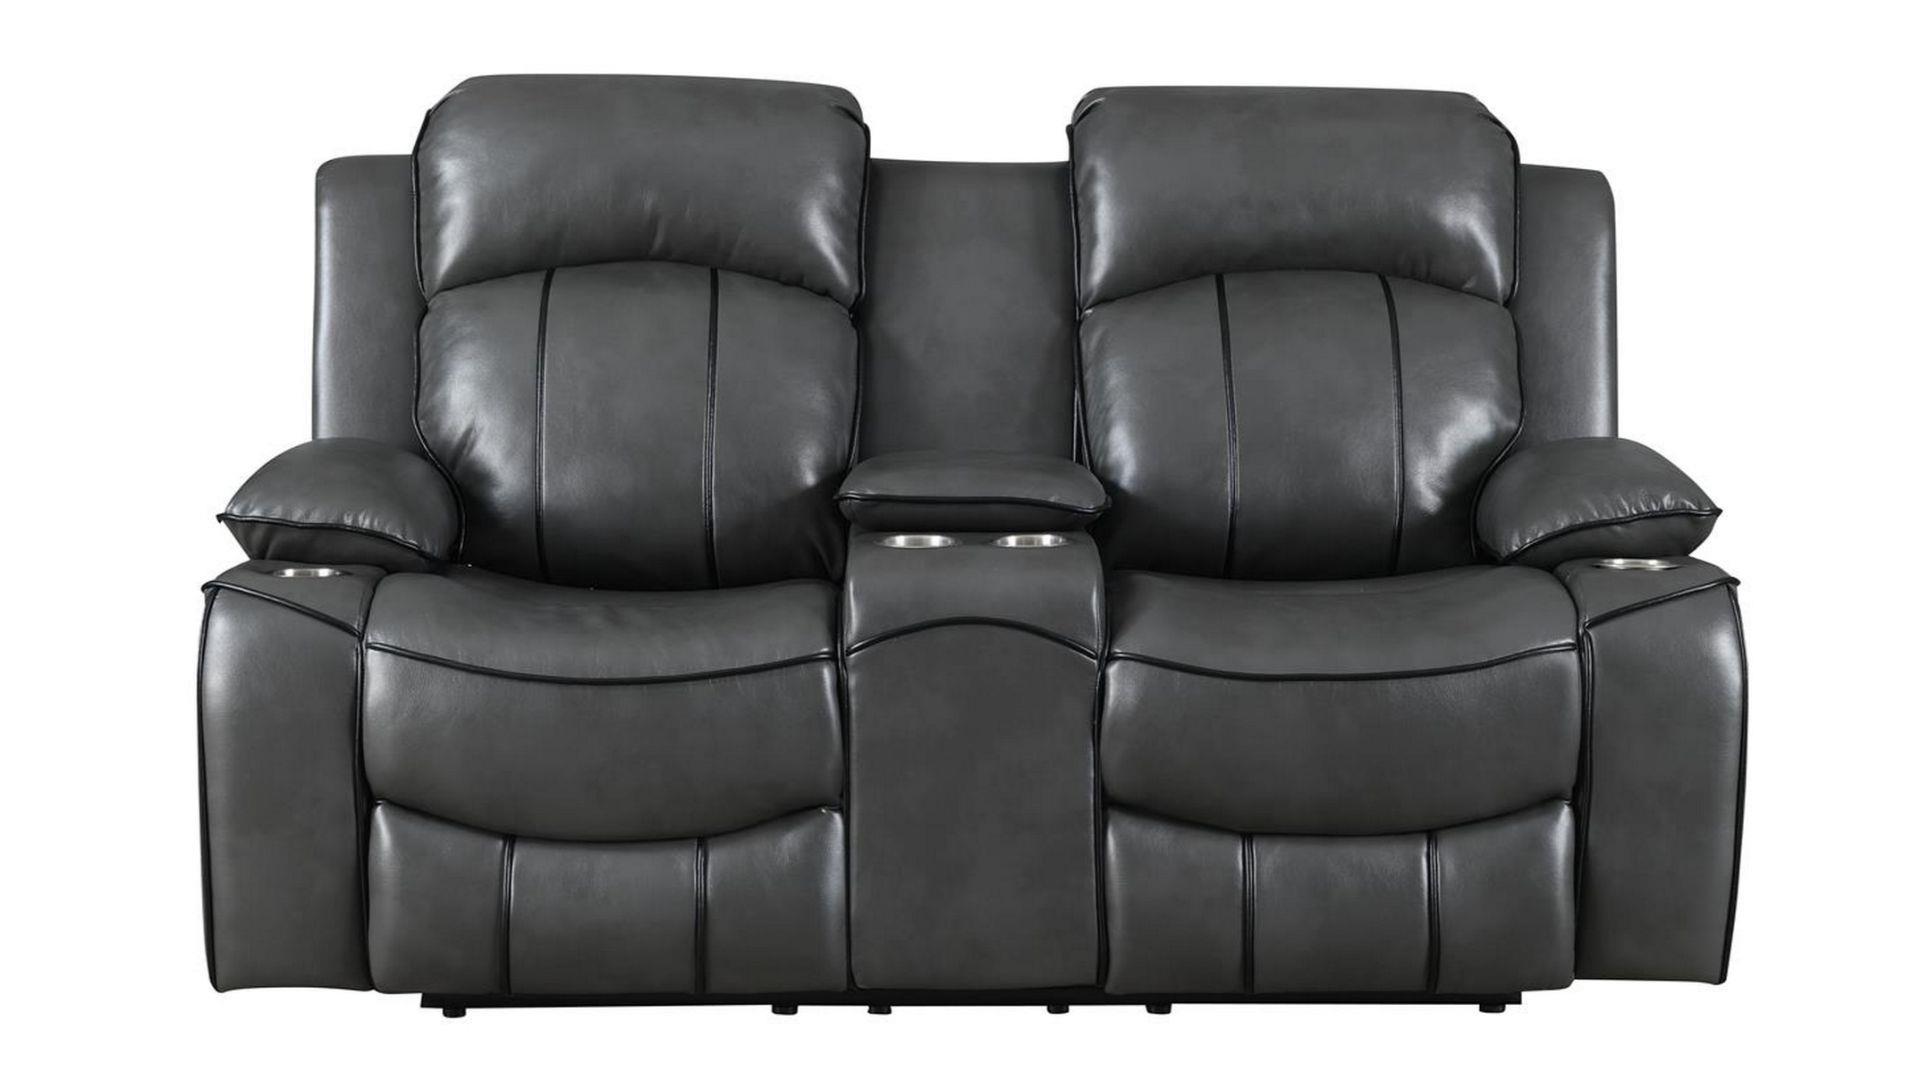 Transitional Power Reclining Loveseat U3120 CHARCOAL GREY U3120-DTP672-7 GREY W/DTP672-14 BLK WELTS-PCRLS in Gray Faux Leather